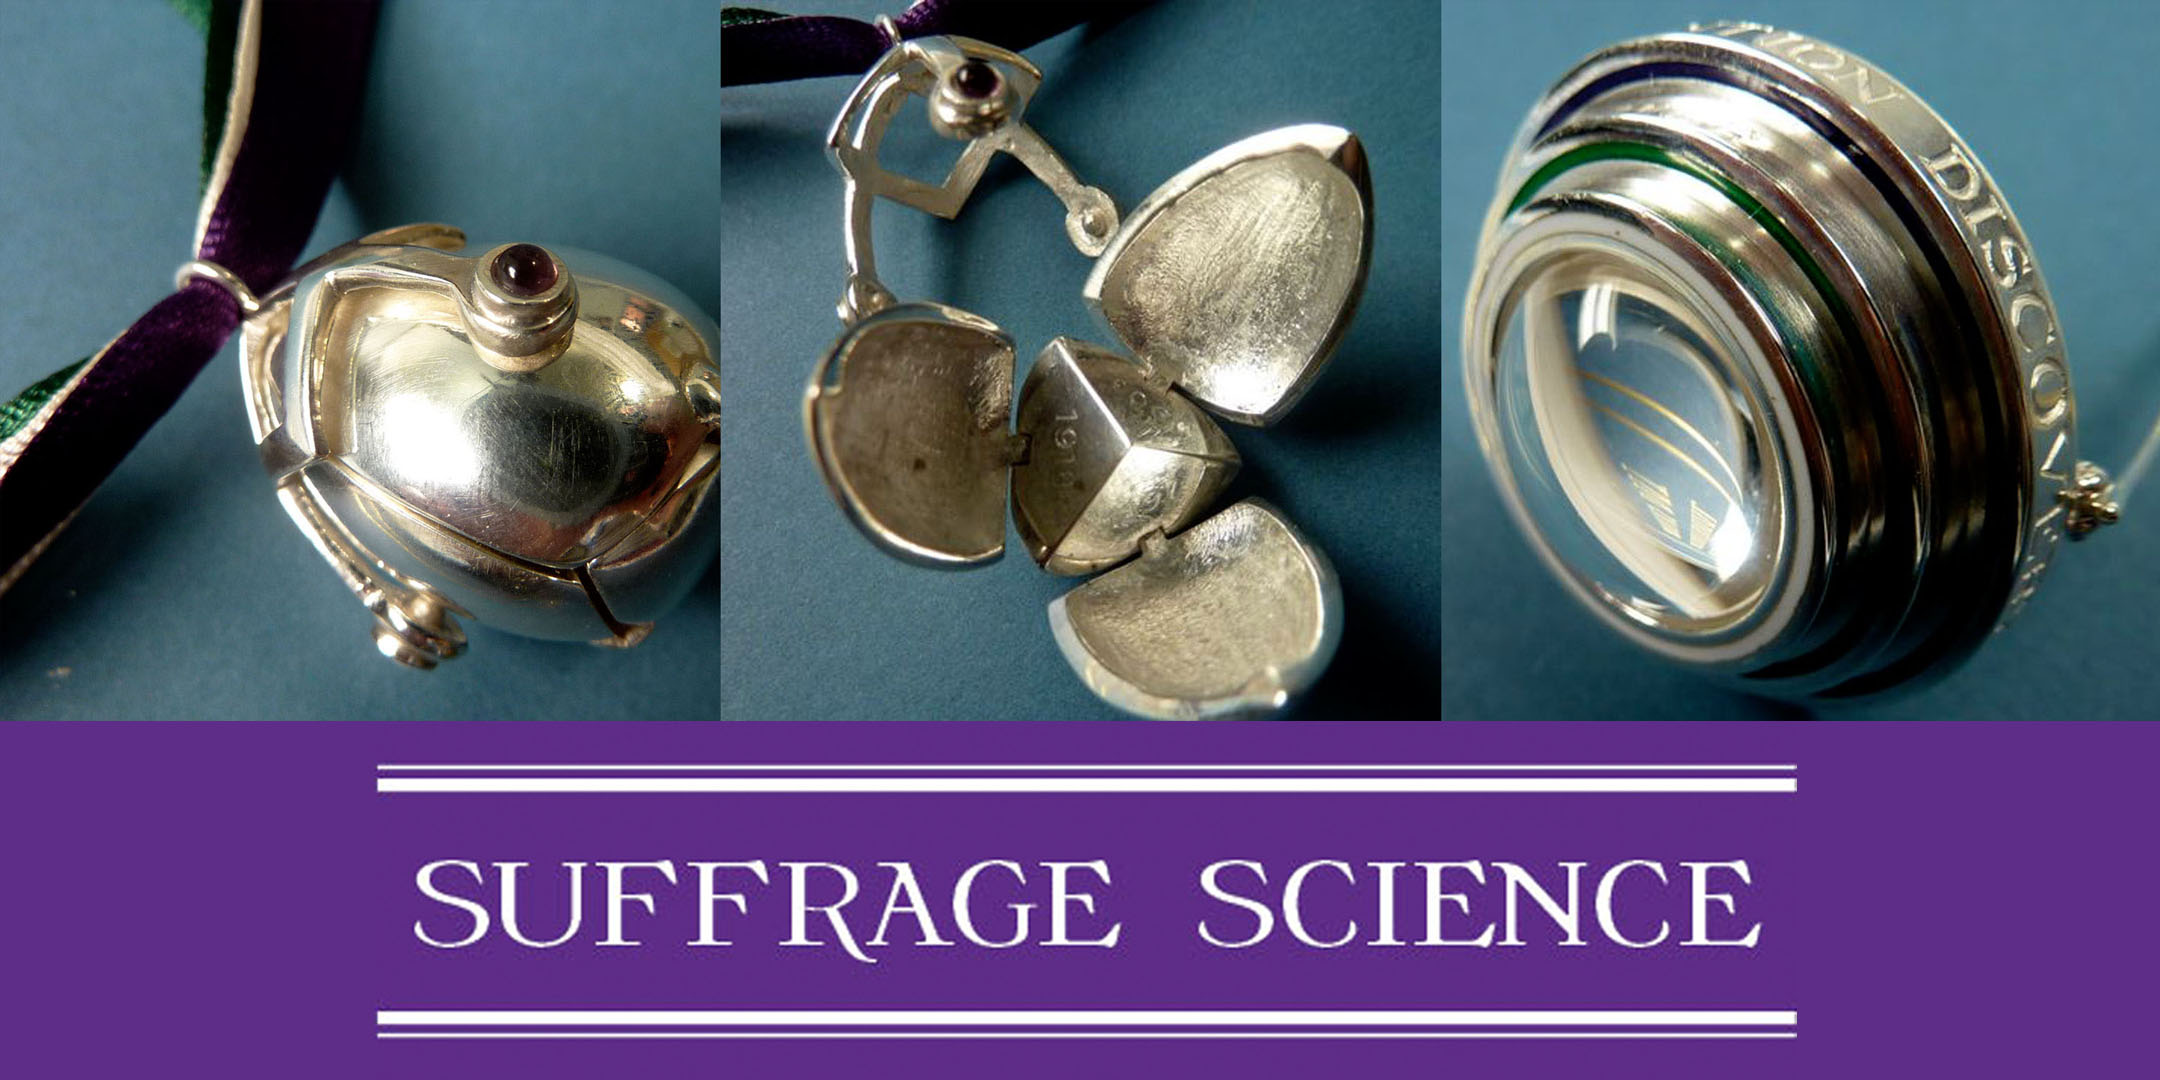 Suffrage Science